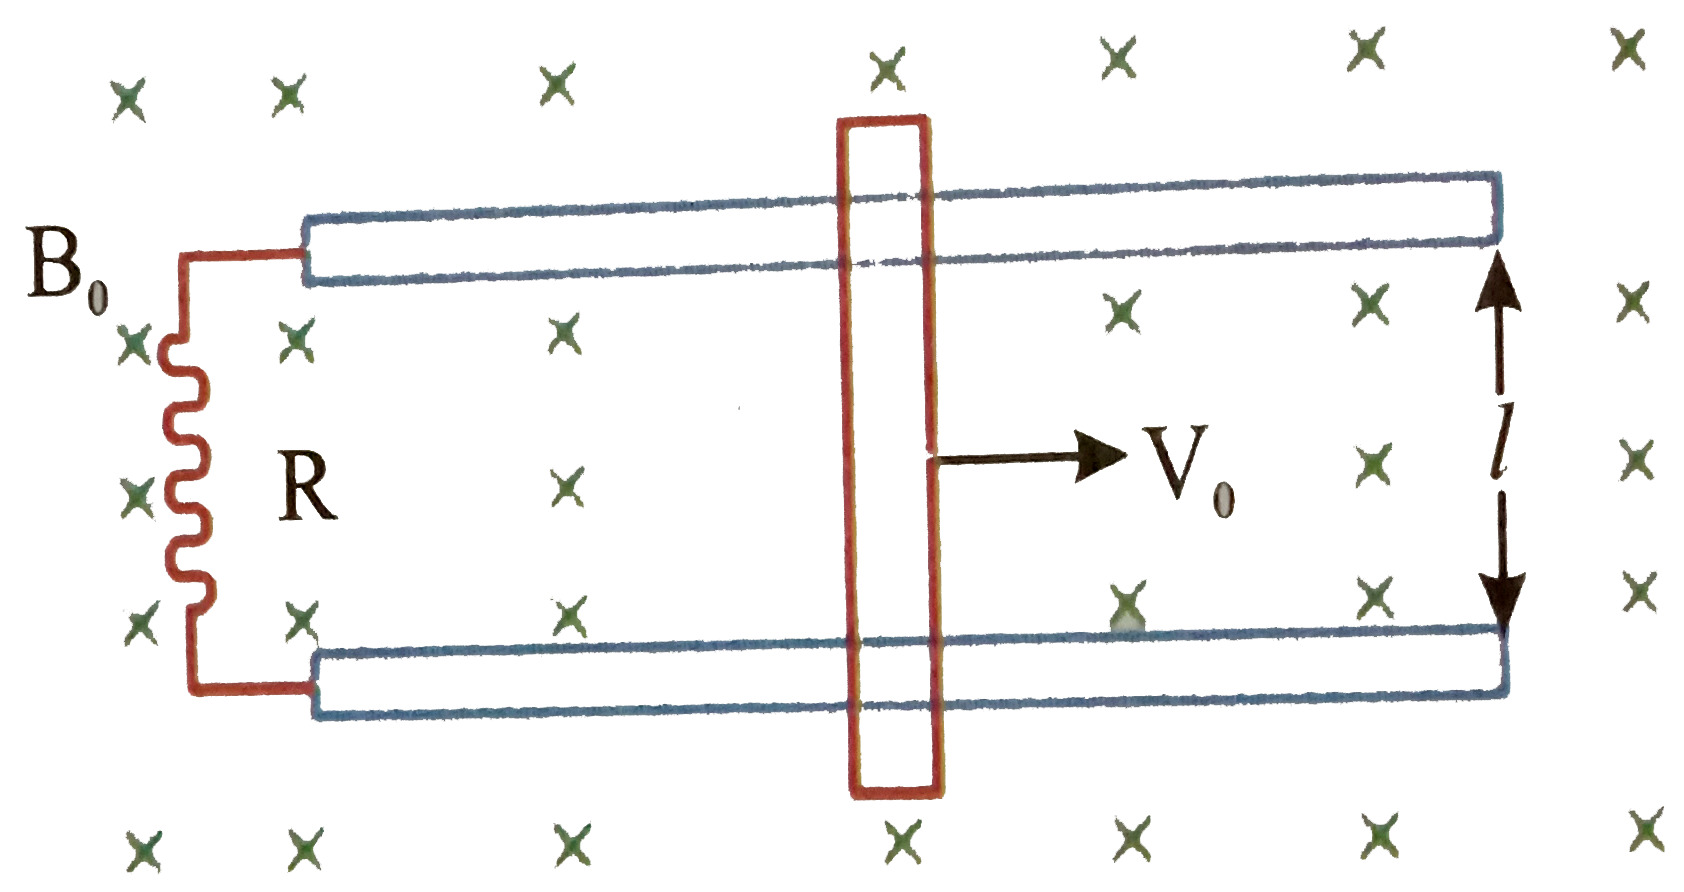 A conducting bar mass m and length l moves on two frictionless parallel conducting rails in the presence of a uniform magnetic field B(0) directed into the paper. The bar is given an initial velocity v(0) to the right and is released at t = 0. The velocity of the bar as a function of time is given by